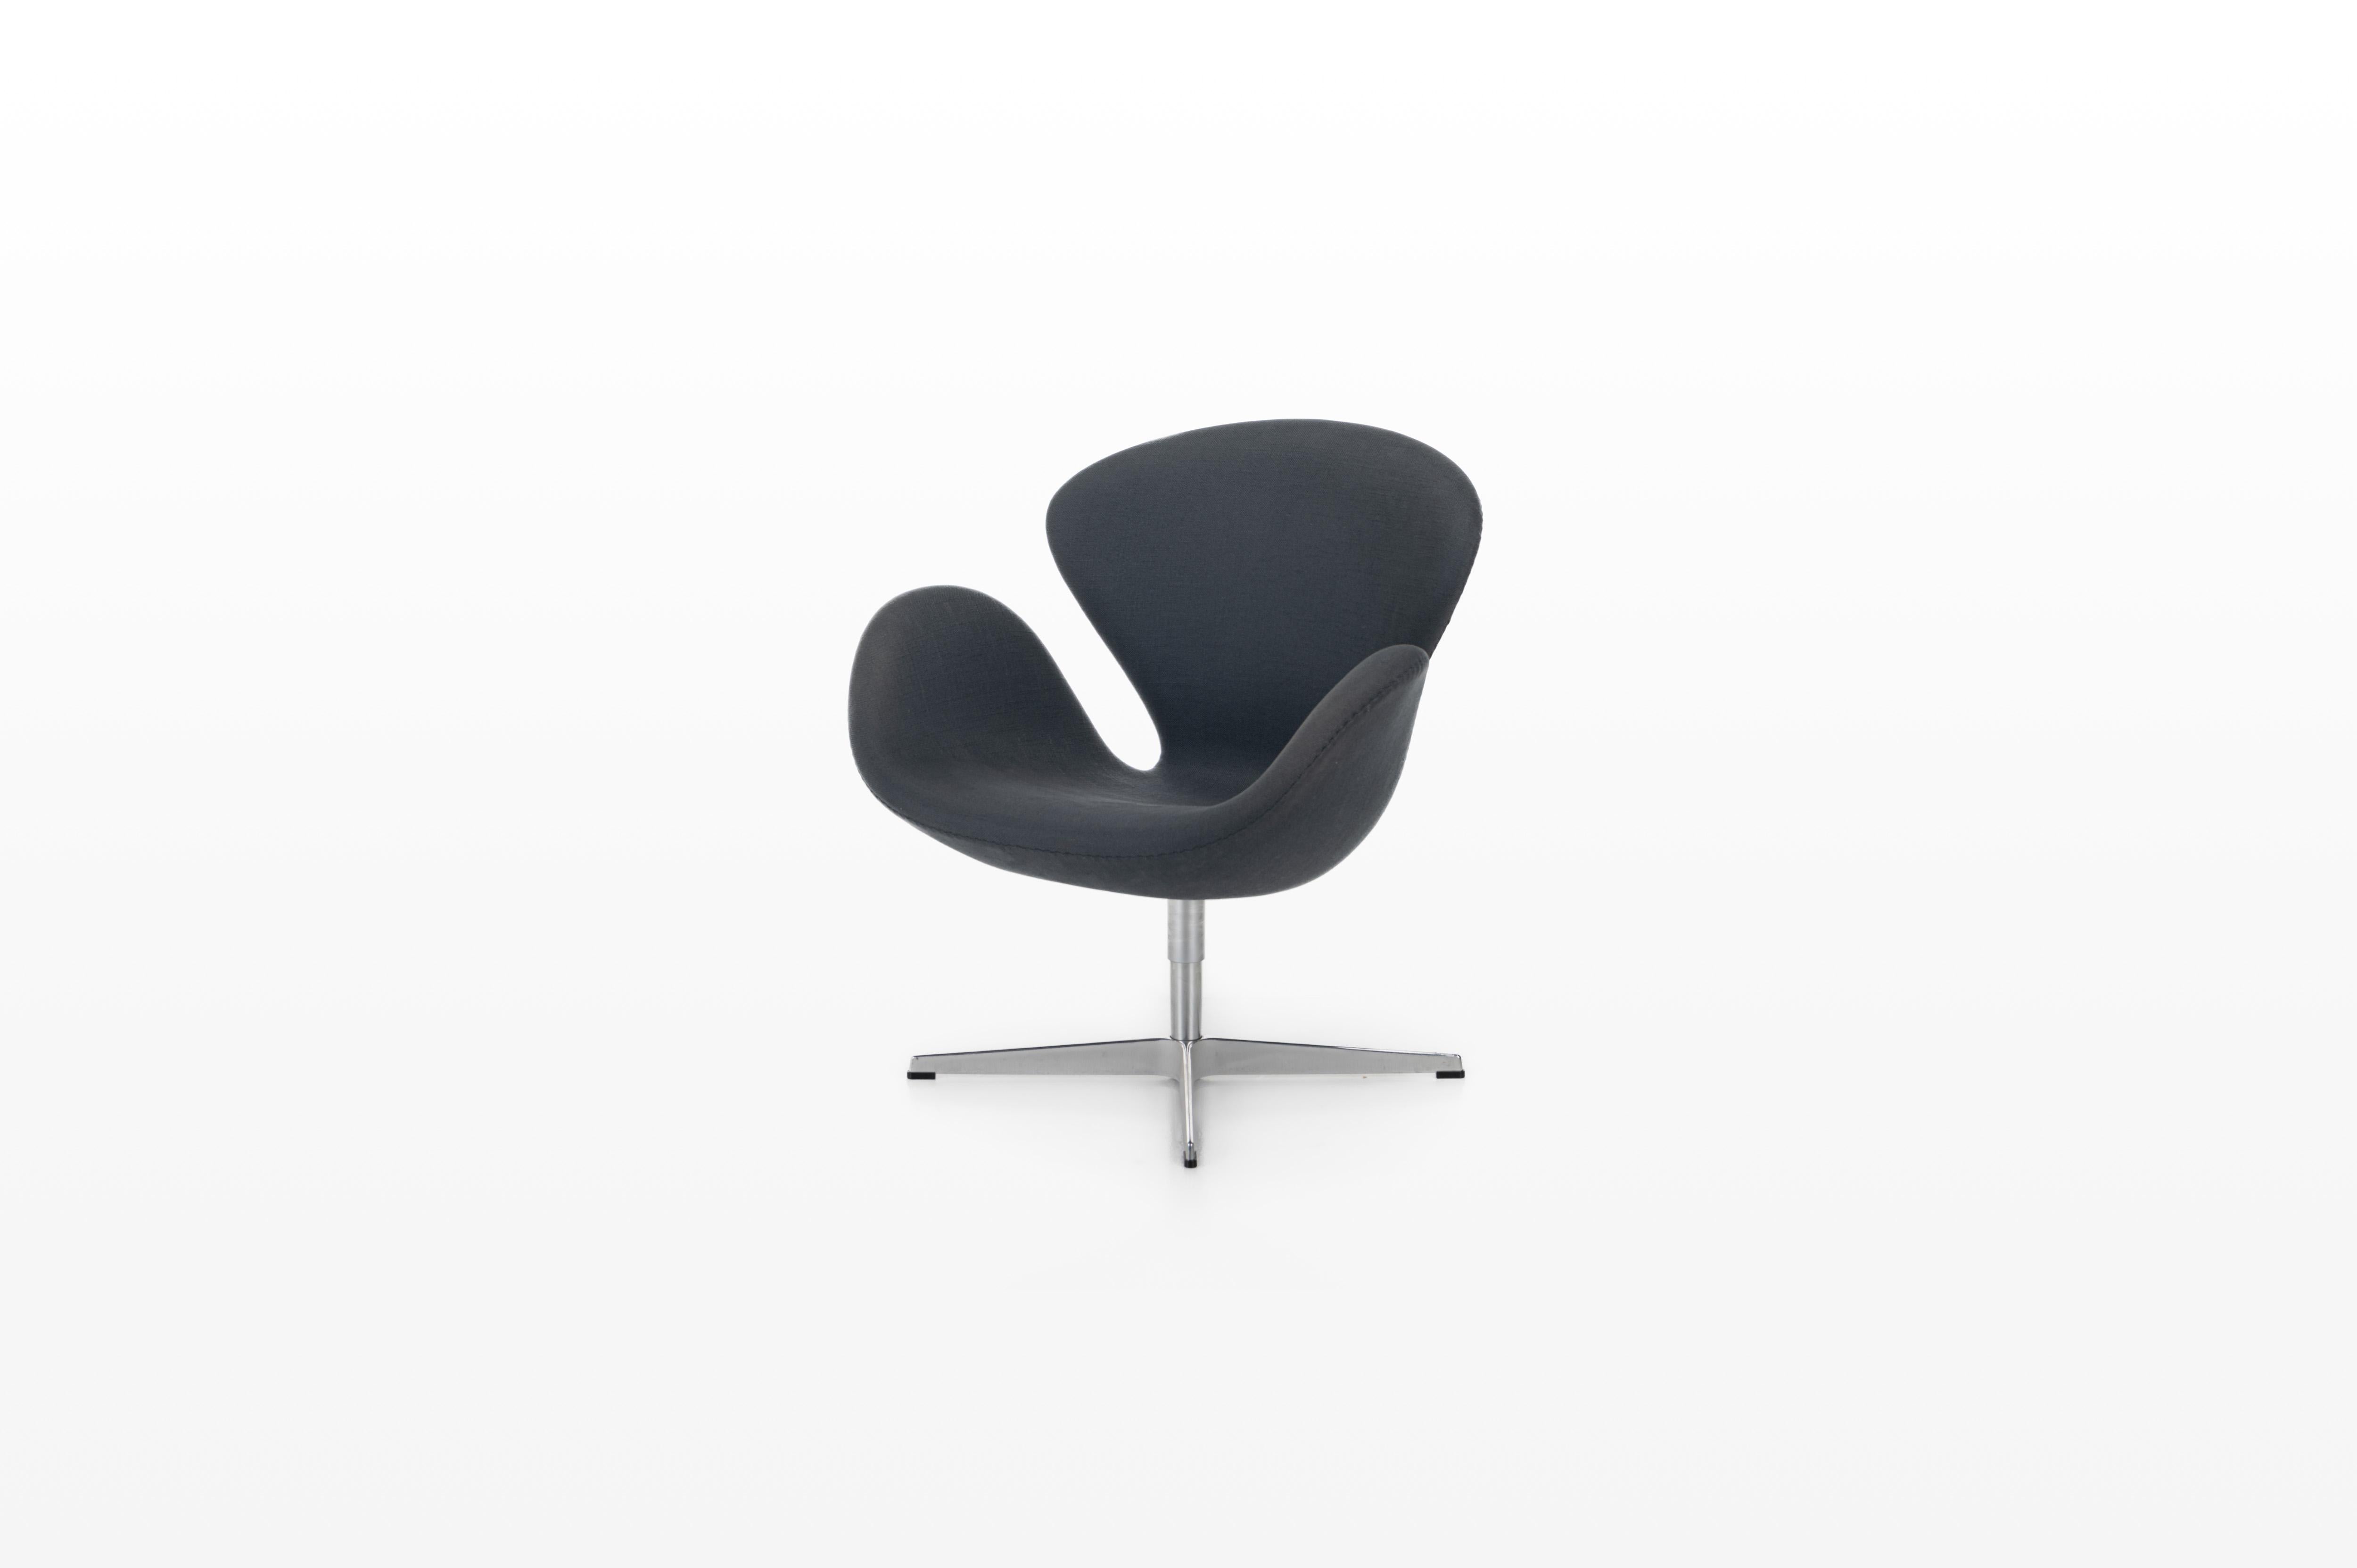 Beautiful Swan chair, designed by Arne Jacobsen. He designed this chair for the SAS Royal hotel in Copenhagen in 1958 and is produced by Fritz Hansen. The swivel chair has a washed blue upholstery and is in very good condition.